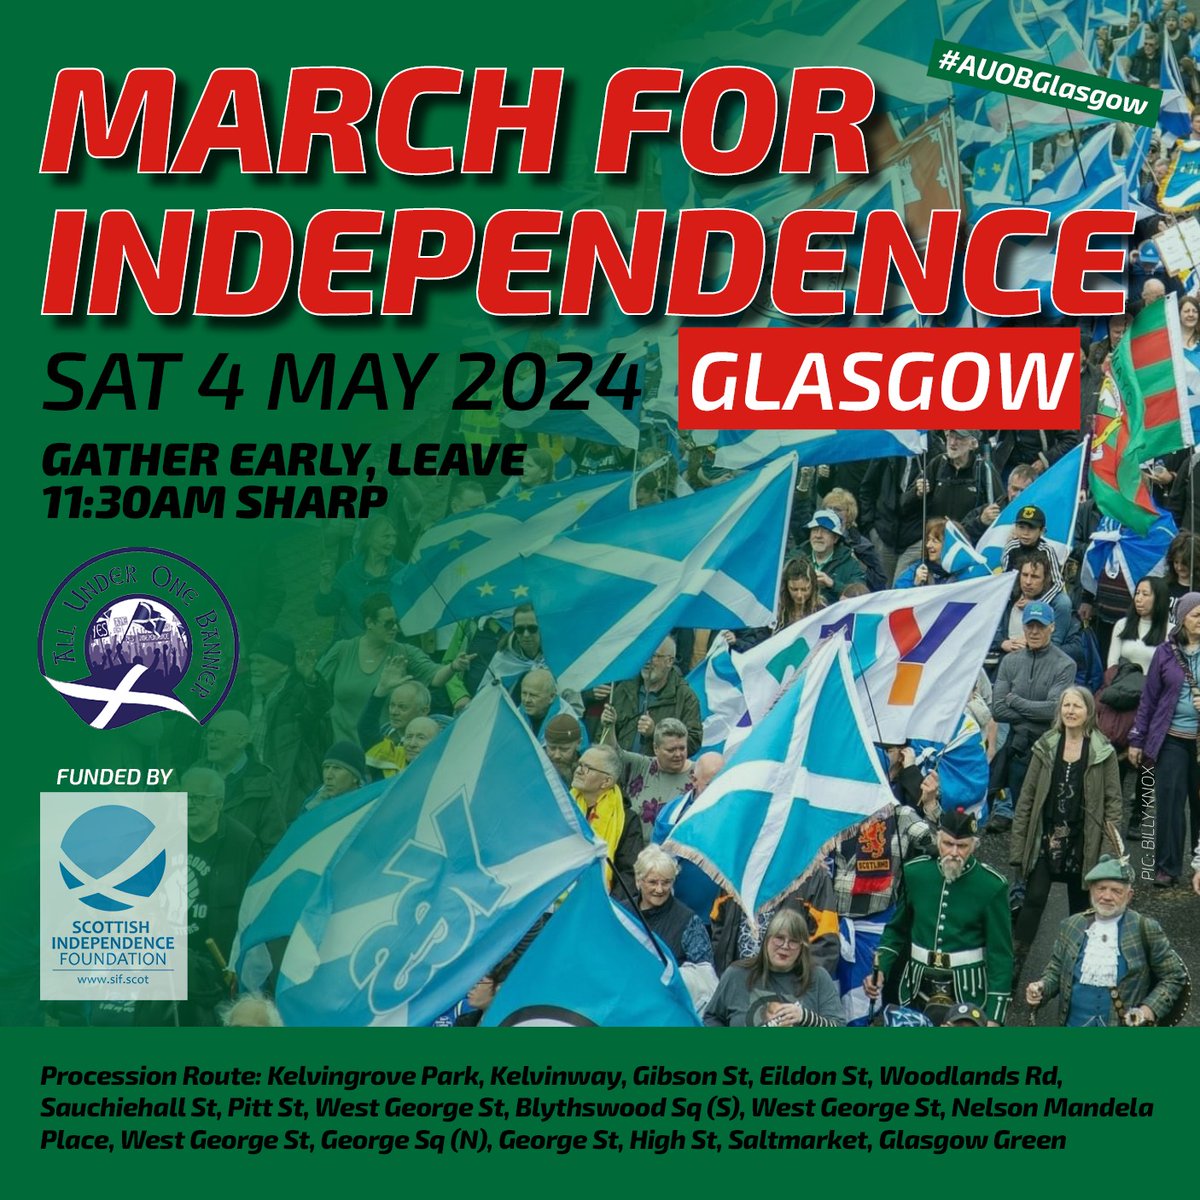 THIS SATURDAY 🔊🔊🔊

Make sure to attend the National demonstration for self determination.

MARCH FOR INDEPENDENCE 🏴󠁧󠁢󠁳󠁣󠁴󠁿
GLASGOW - SATURDAY 4 MAY
#AUOBGlasgow